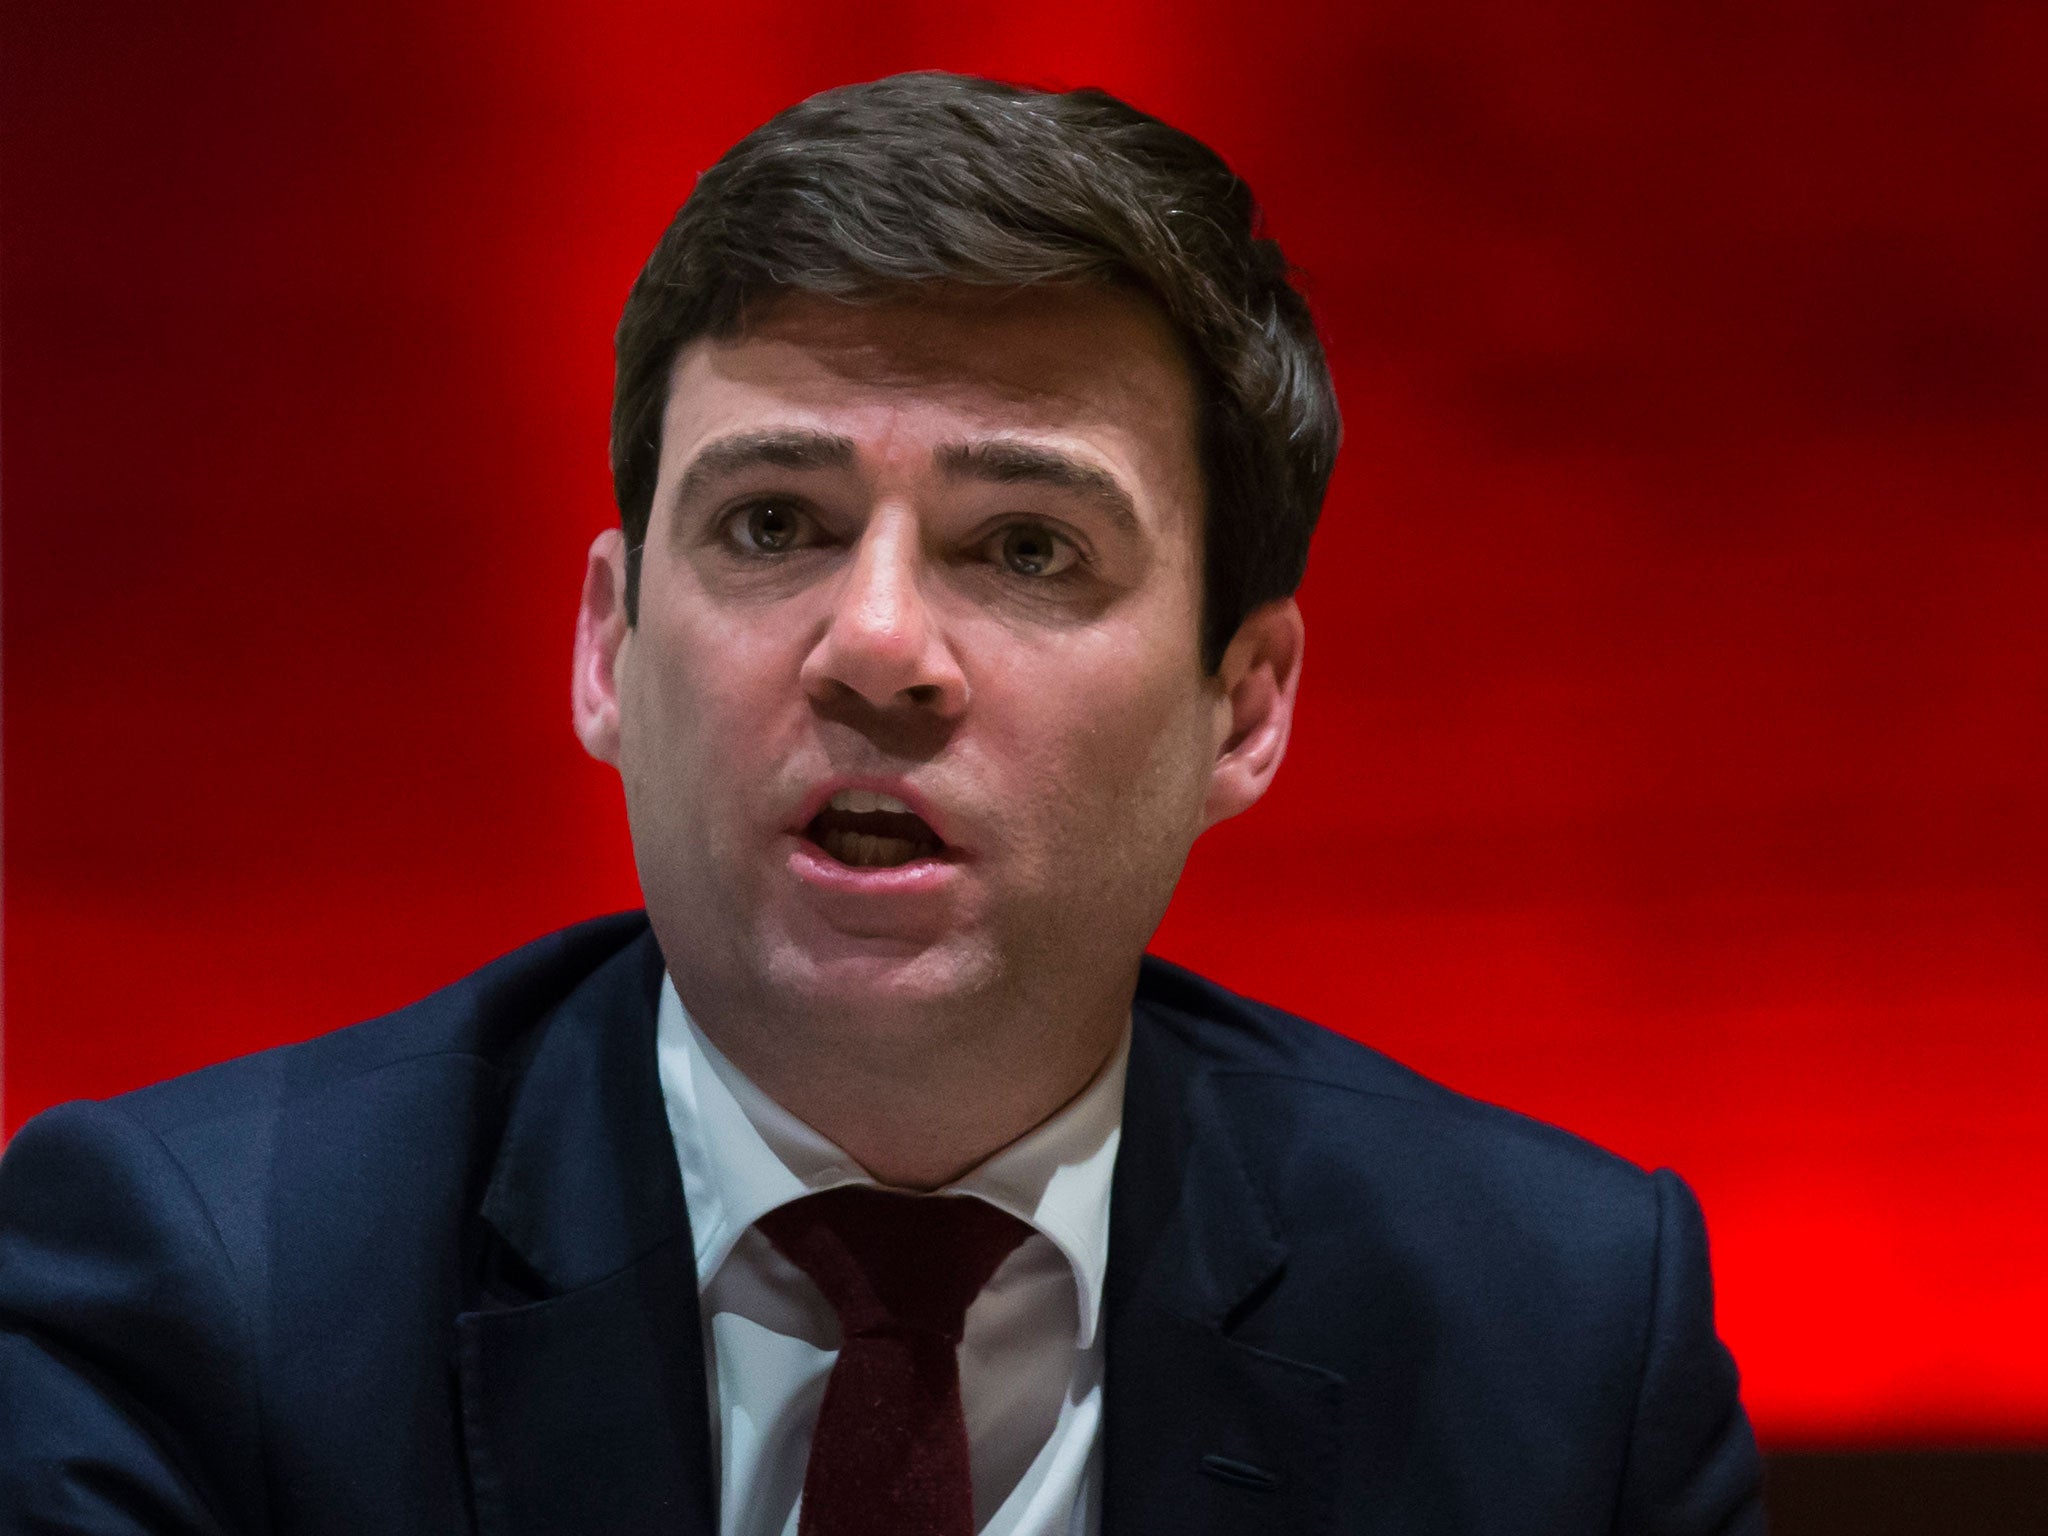 The shadow Health Secretary, Andy Burnham, says a Tory win would mean NHS privatisation